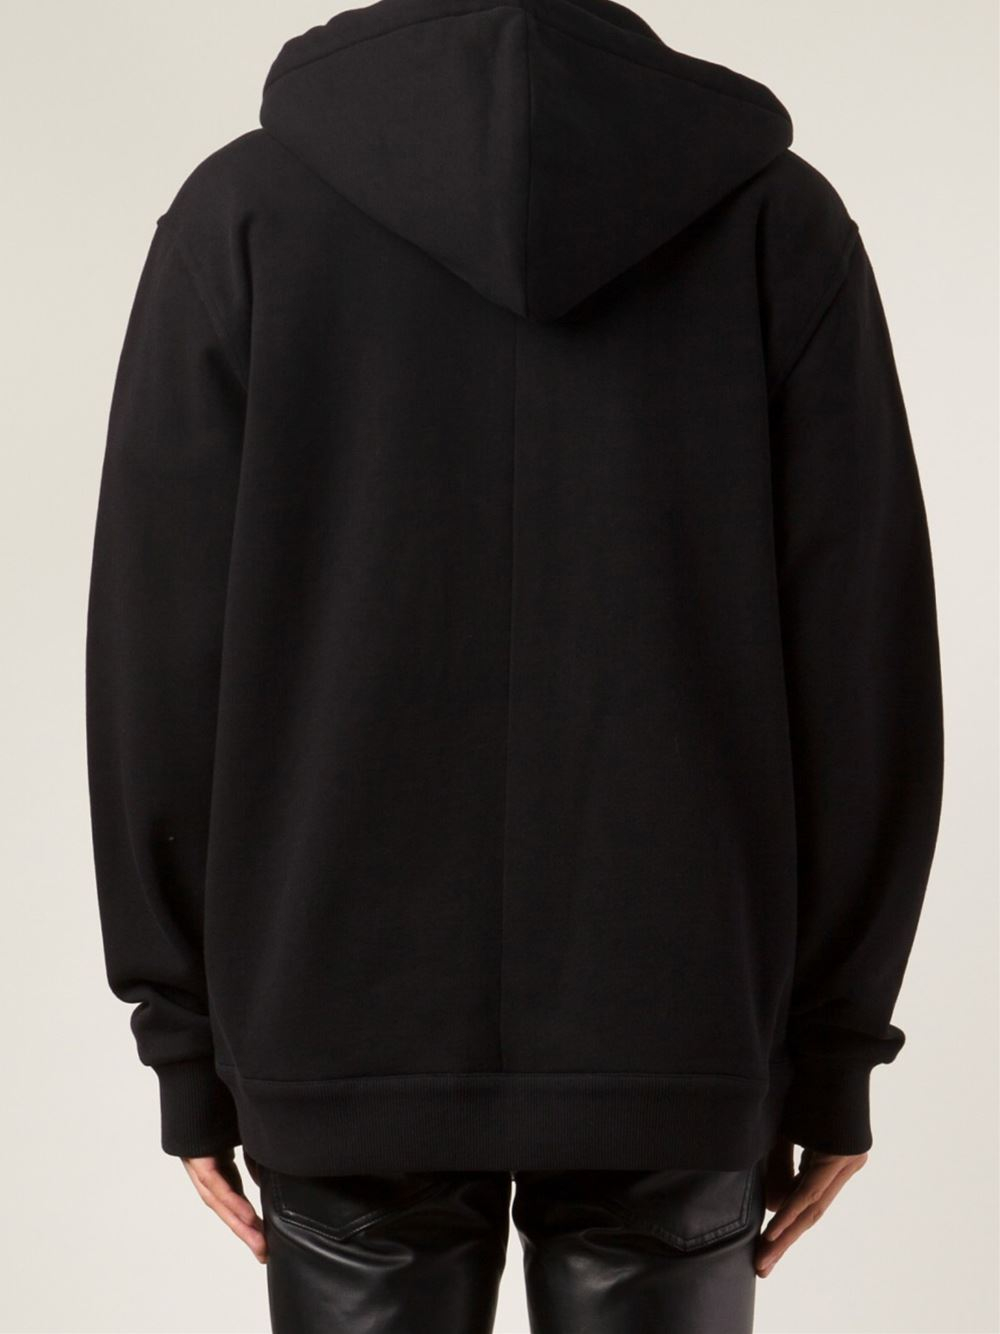 Lyst - Givenchy Zip Up Hoodie in Black for Men